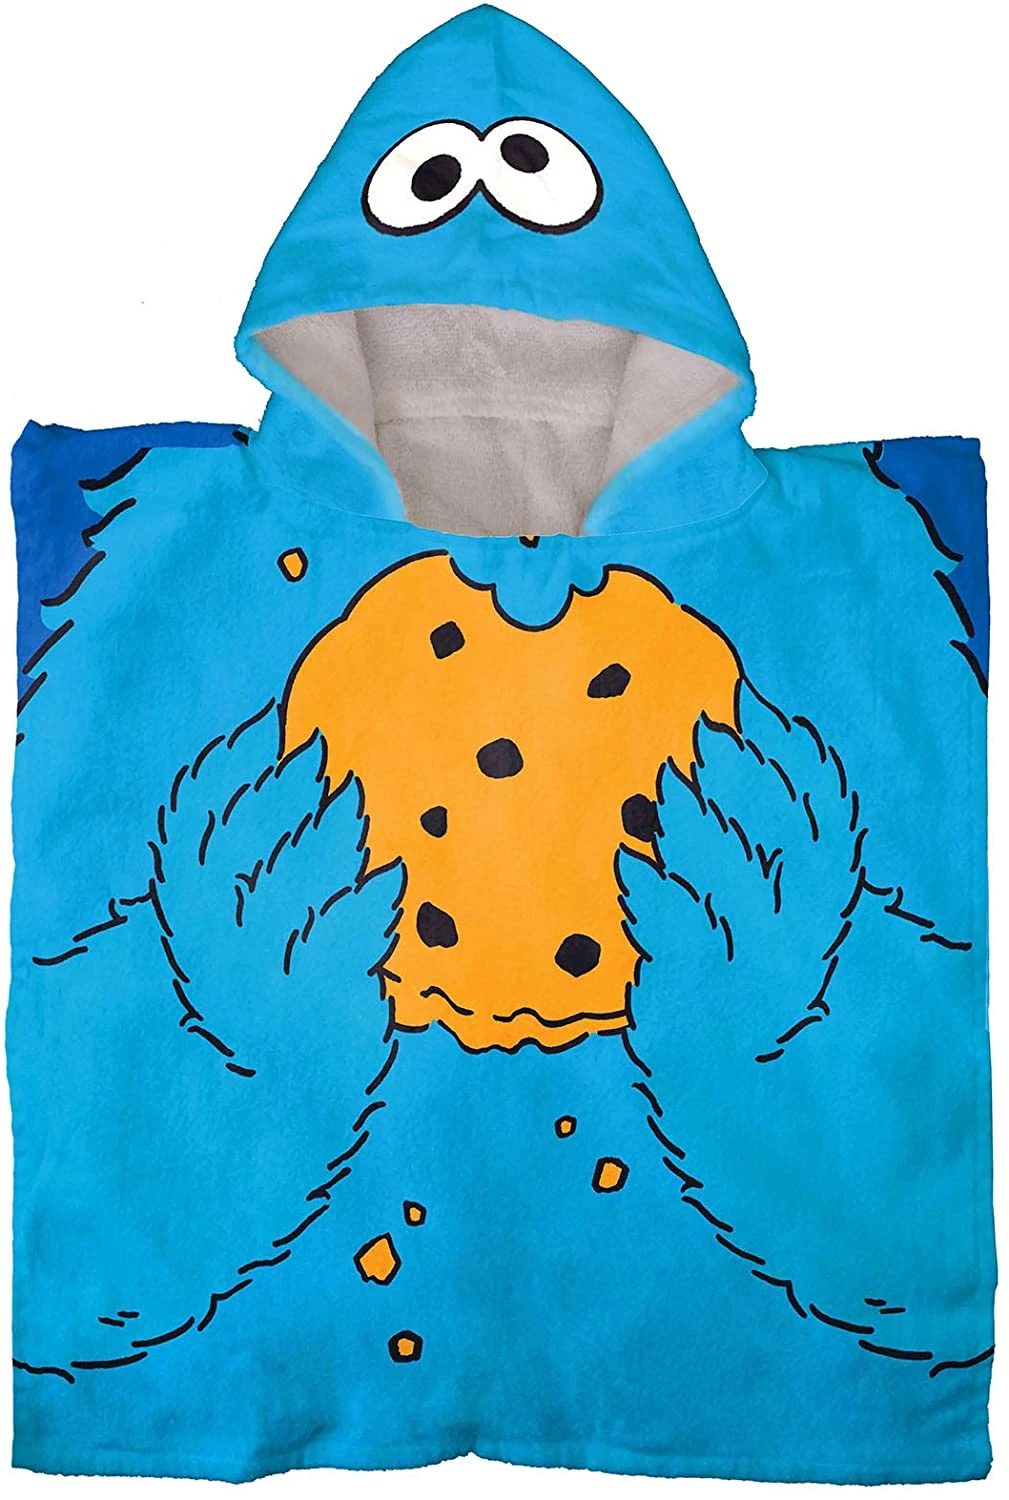 Kids Bath/Pool/Beach Hooded Poncho Super Soft & Absorbent Cotton Towel with Certification